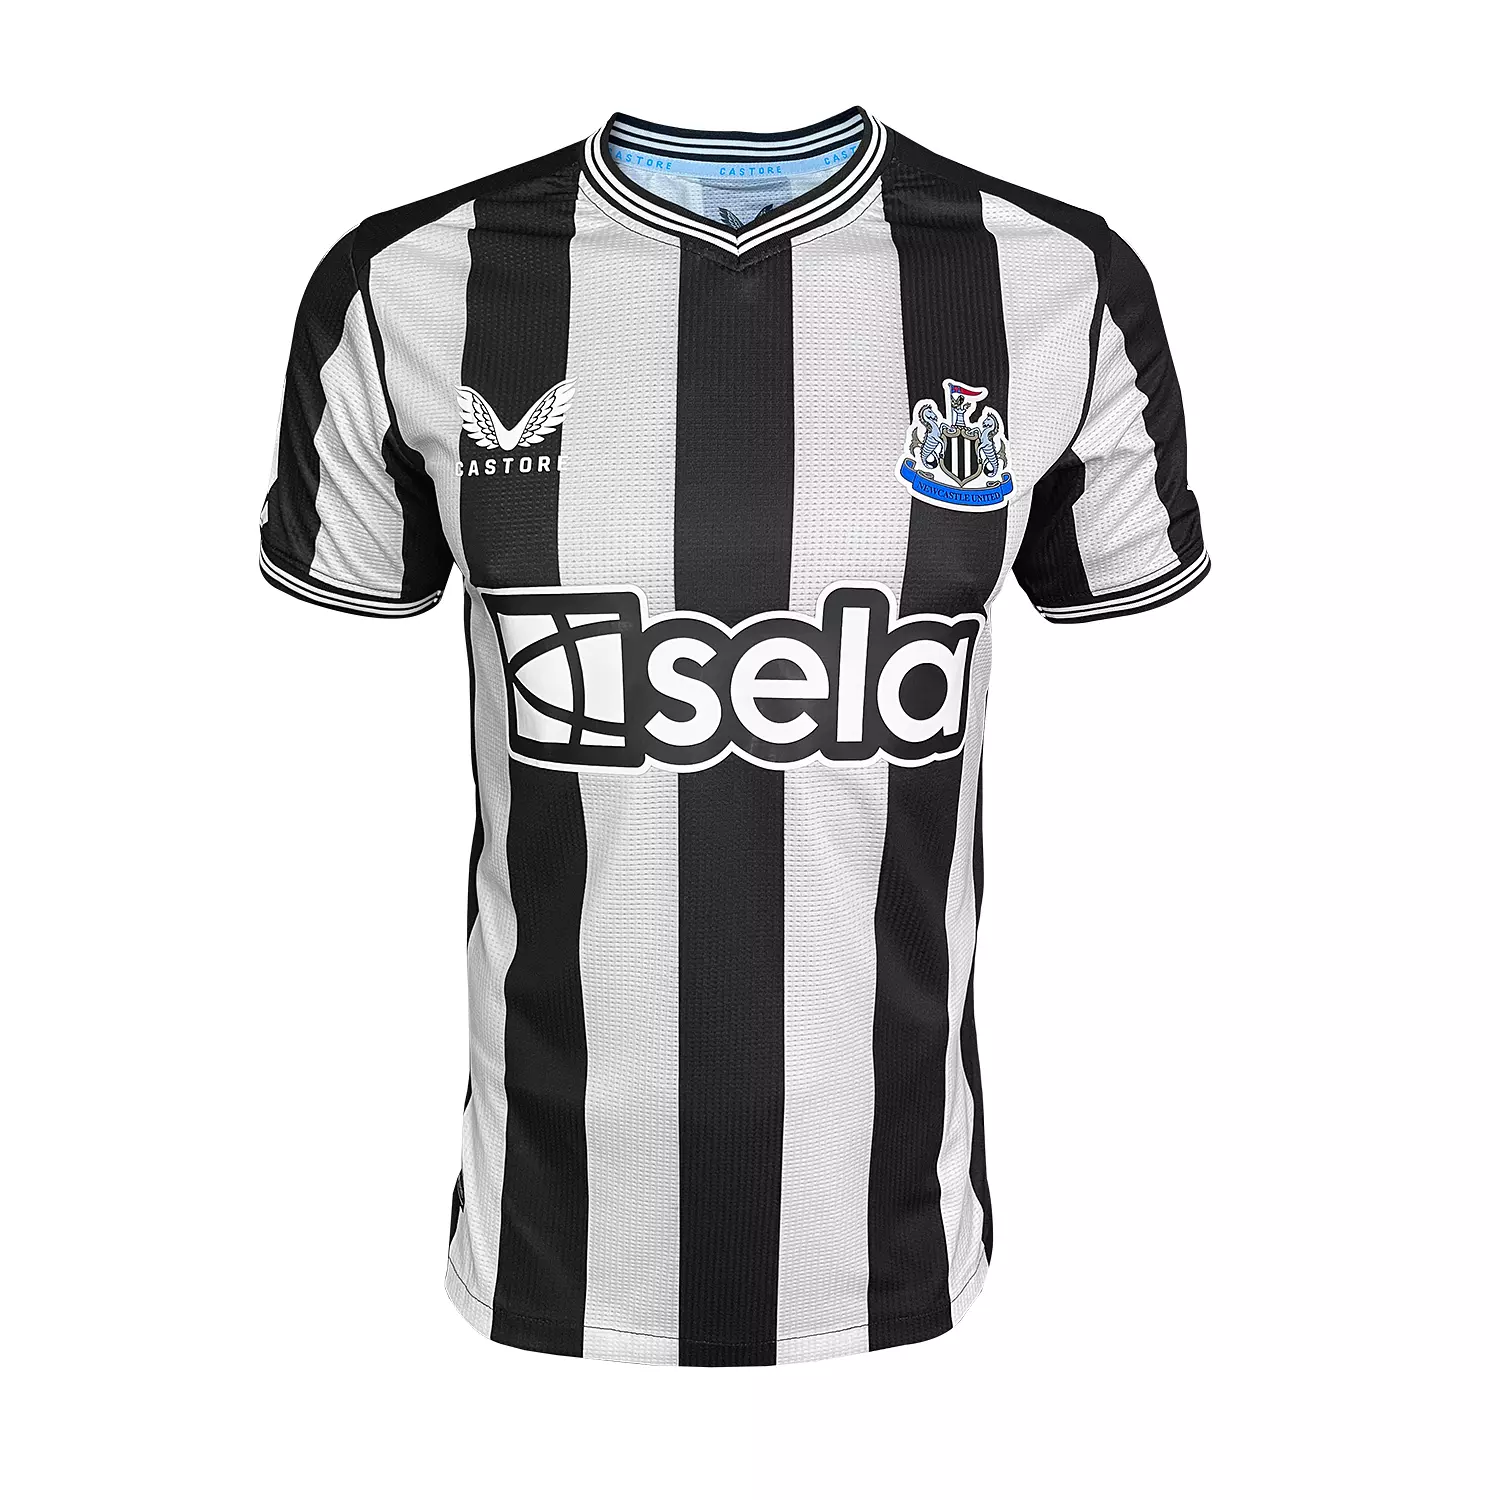 NEWCASTLE UNITED 23/24 - PLAYER hover image